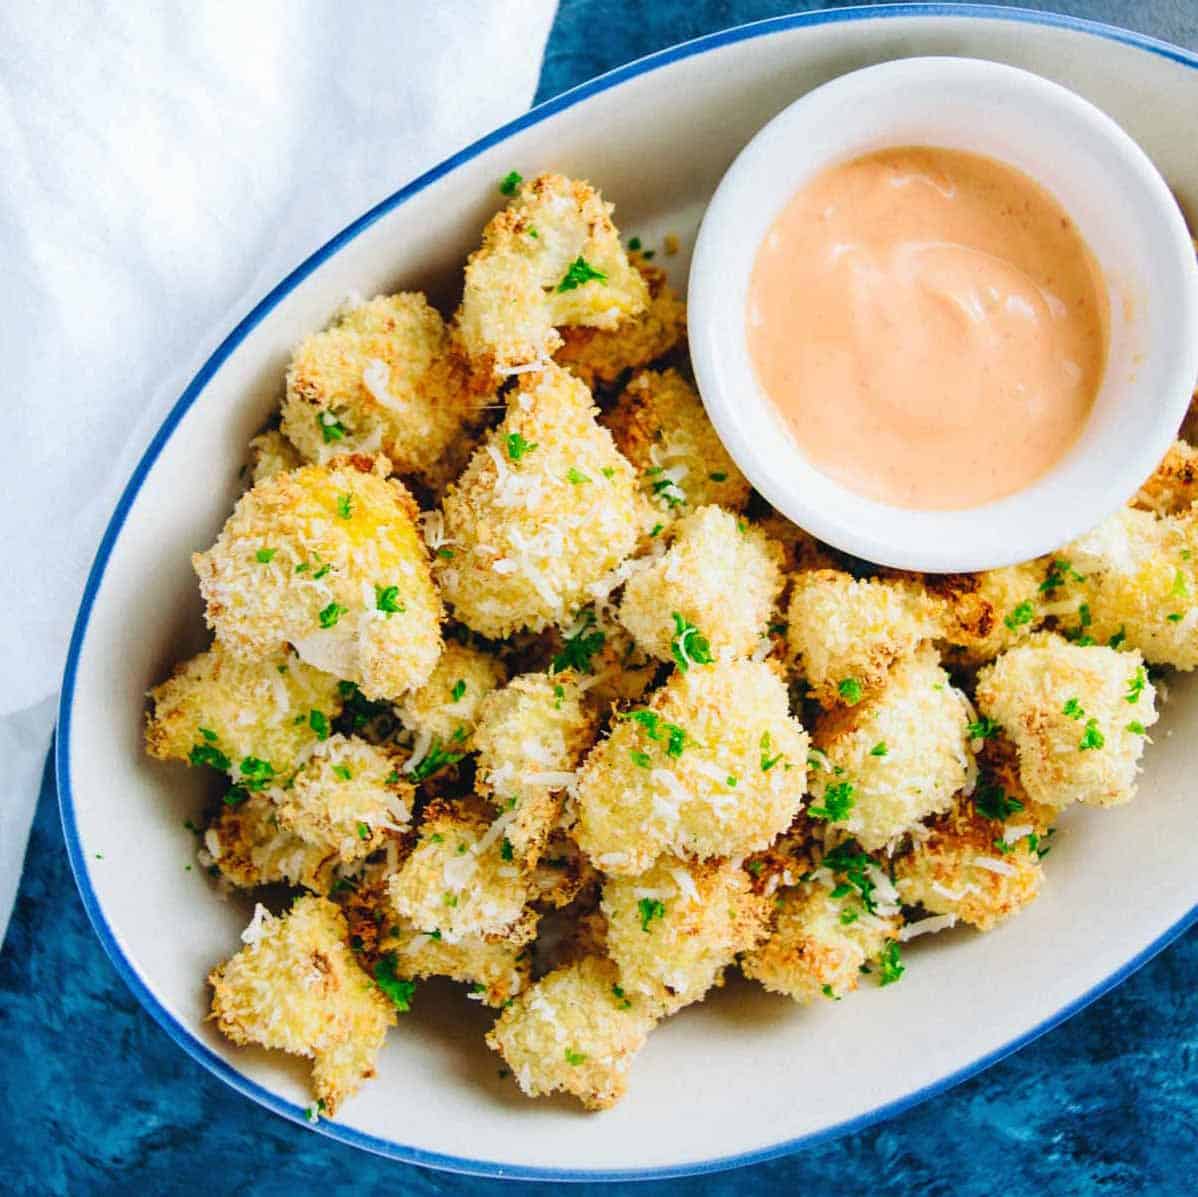 Whip up this healthy and delicious crispy cauliflower bites appetizer with sriracha dipping sauce for your next party.